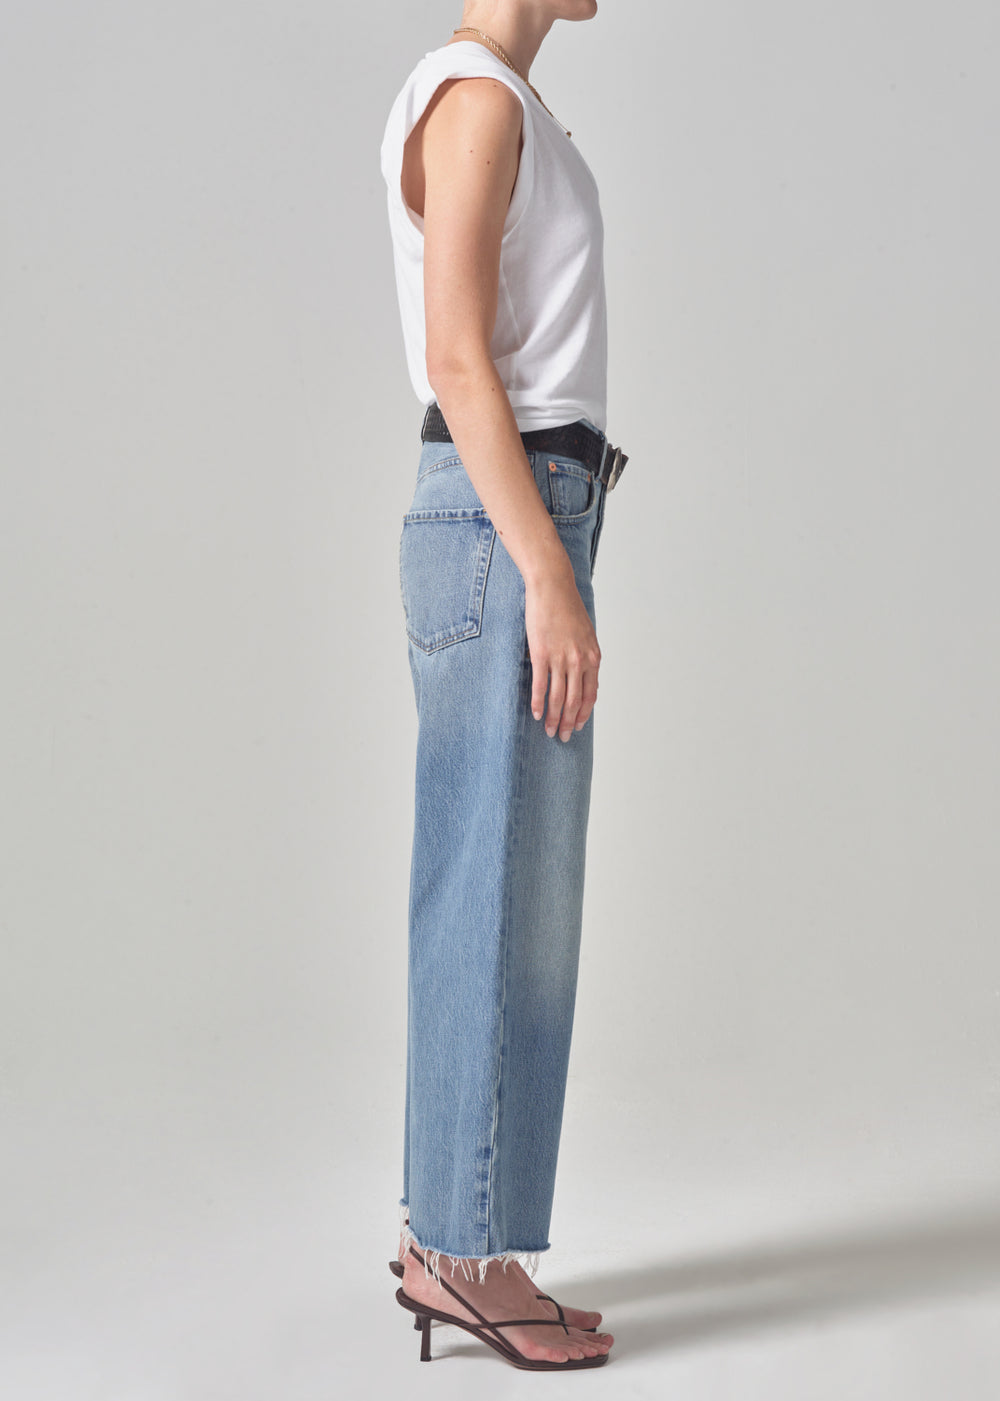 LEO BOUTIQUE AYLA Raw Hem Crop In Sodapop CITIZENS OF HUMANITY